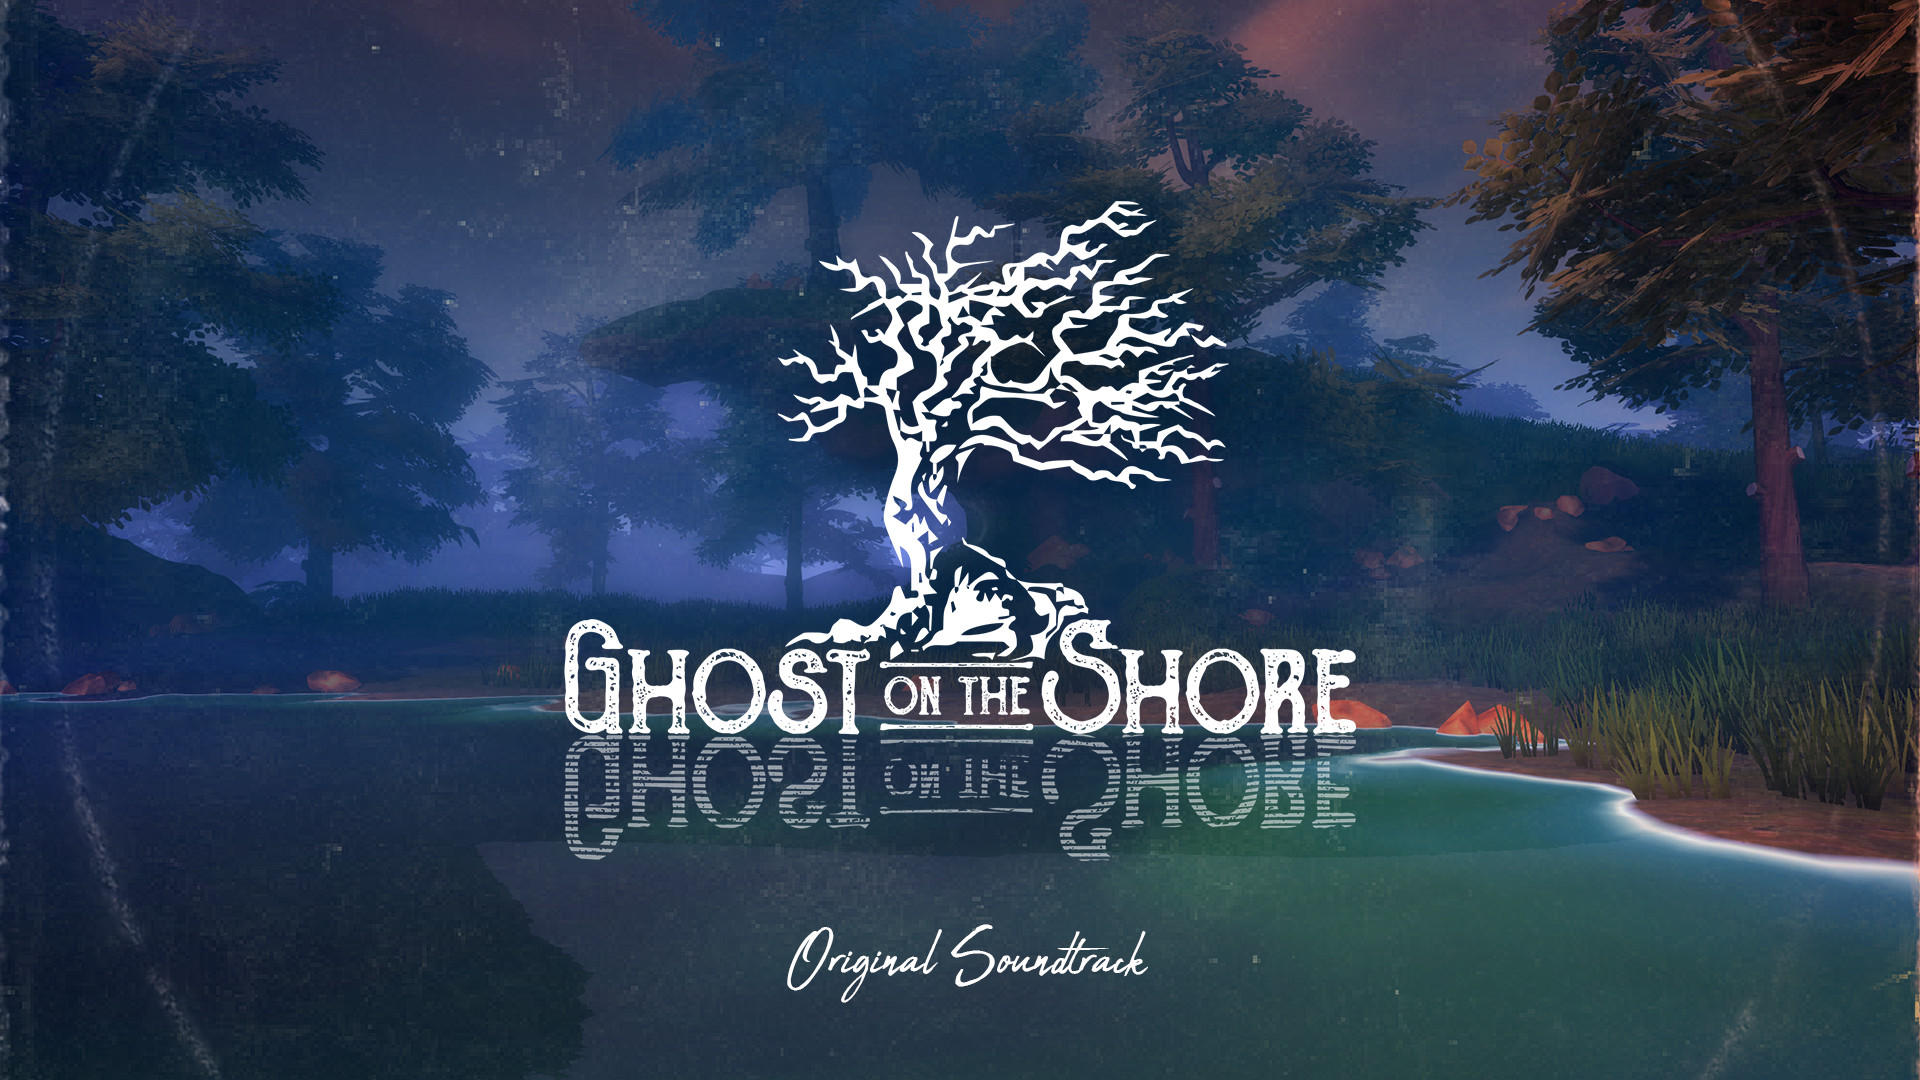 Ghost on the Shore Soundtrack Featured Screenshot #1